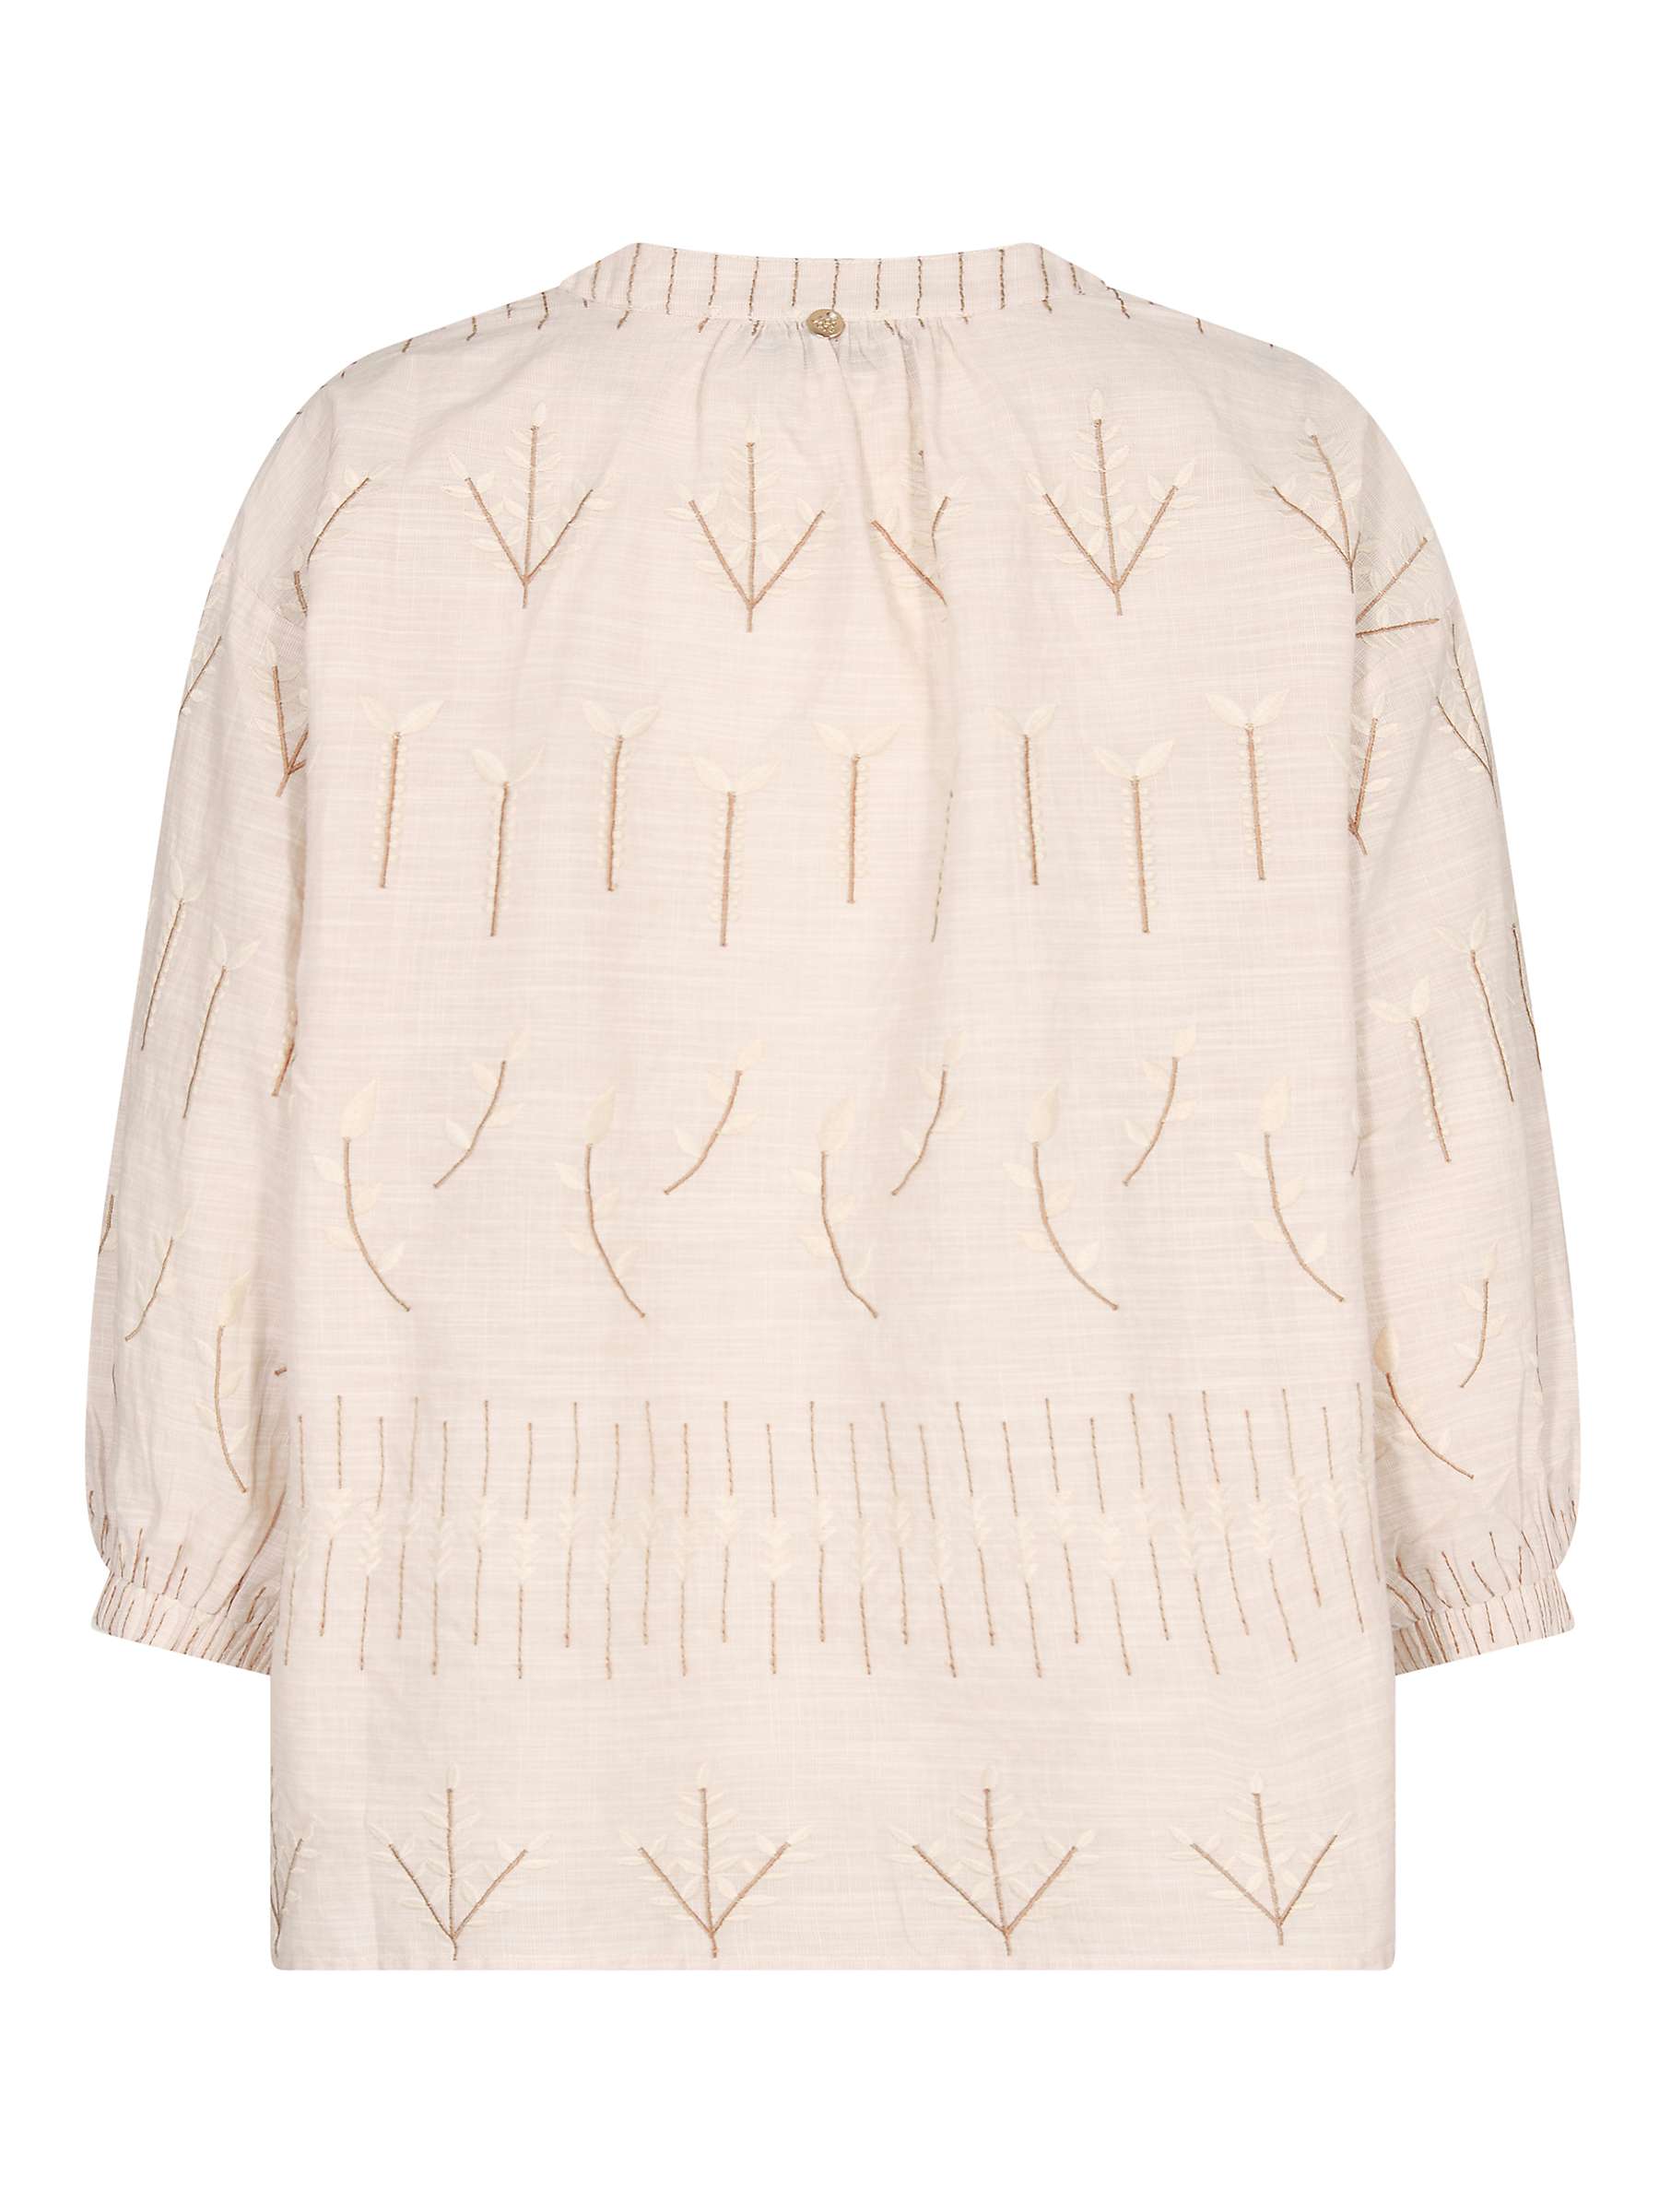 Buy MOS MOSH Nadine Embroidered Blouse, Tan Online at johnlewis.com